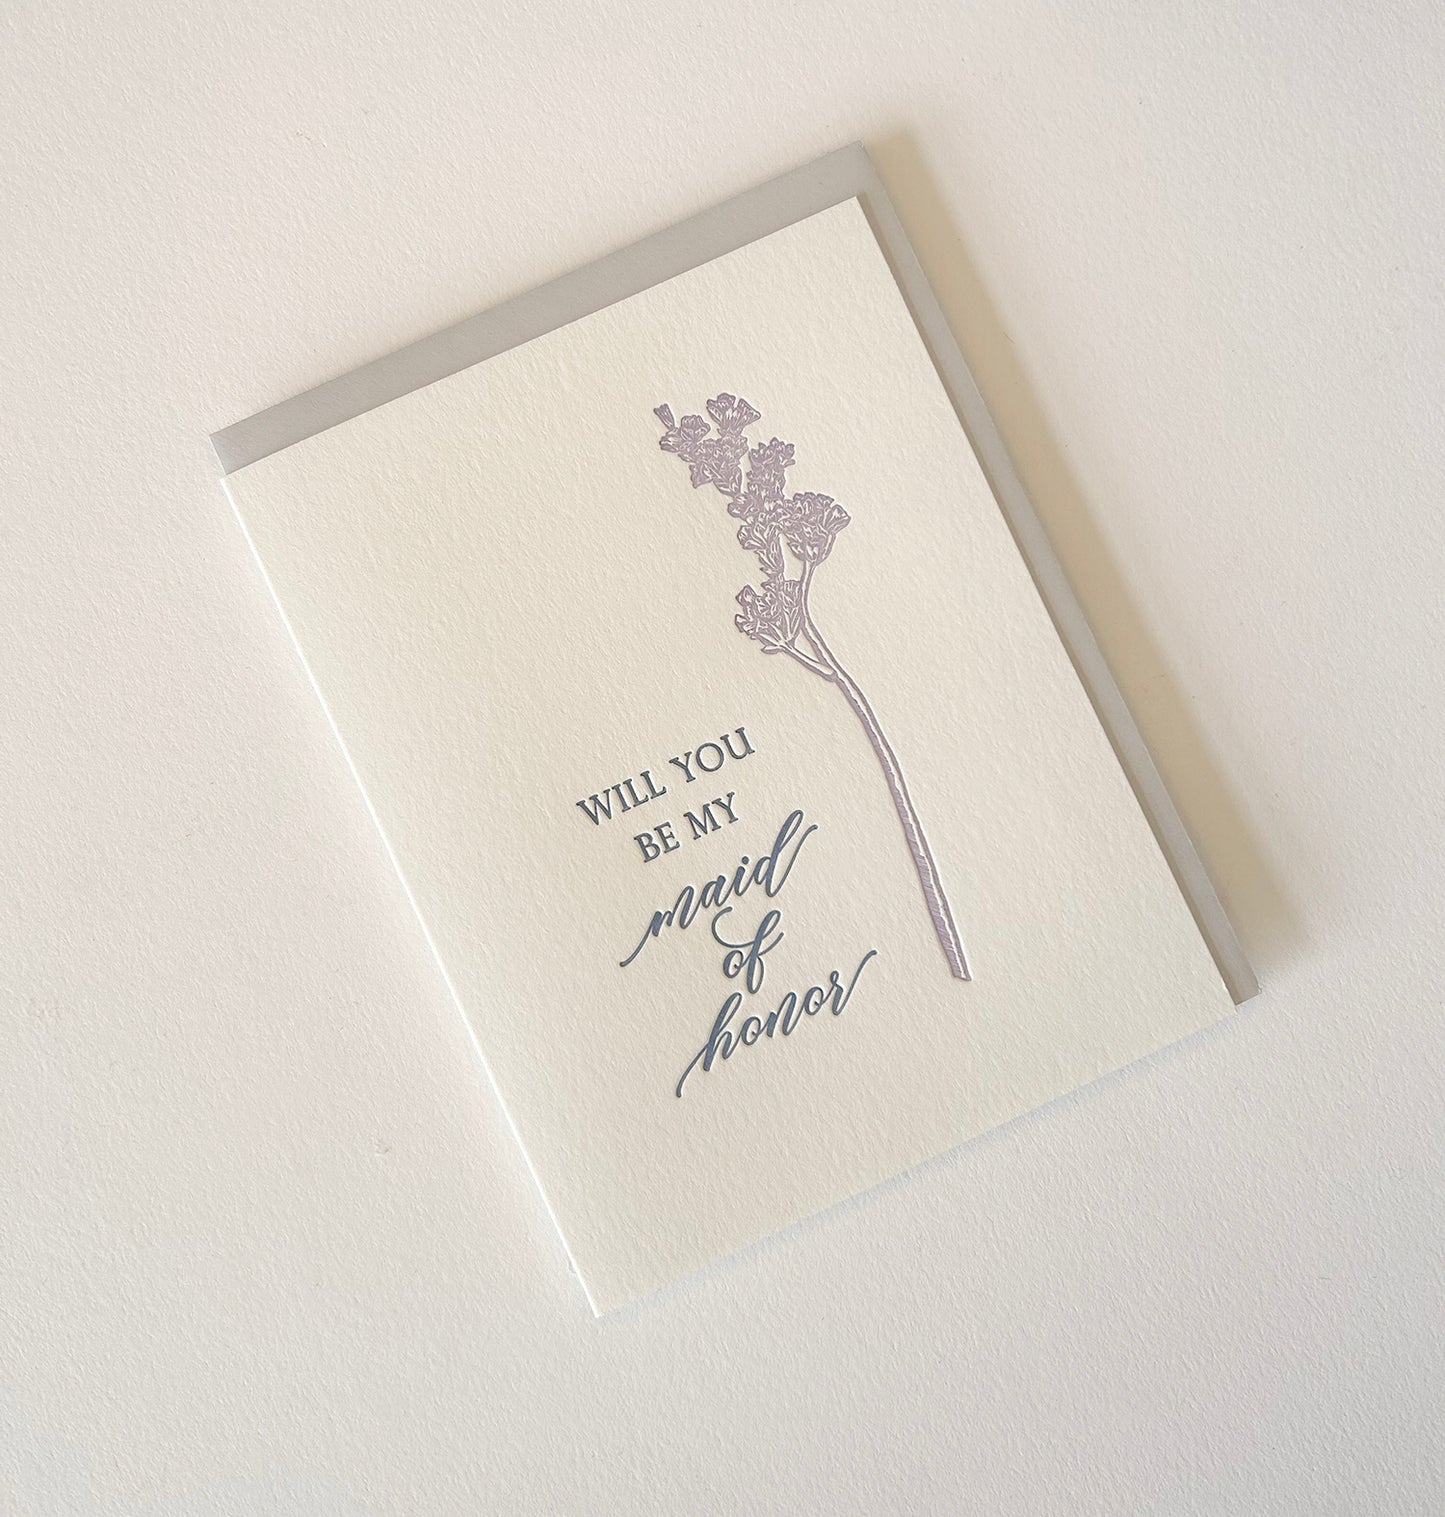 Letterpress wedding card with florals that says " Will You Be My Maid of Honor" by Rust Belt Love